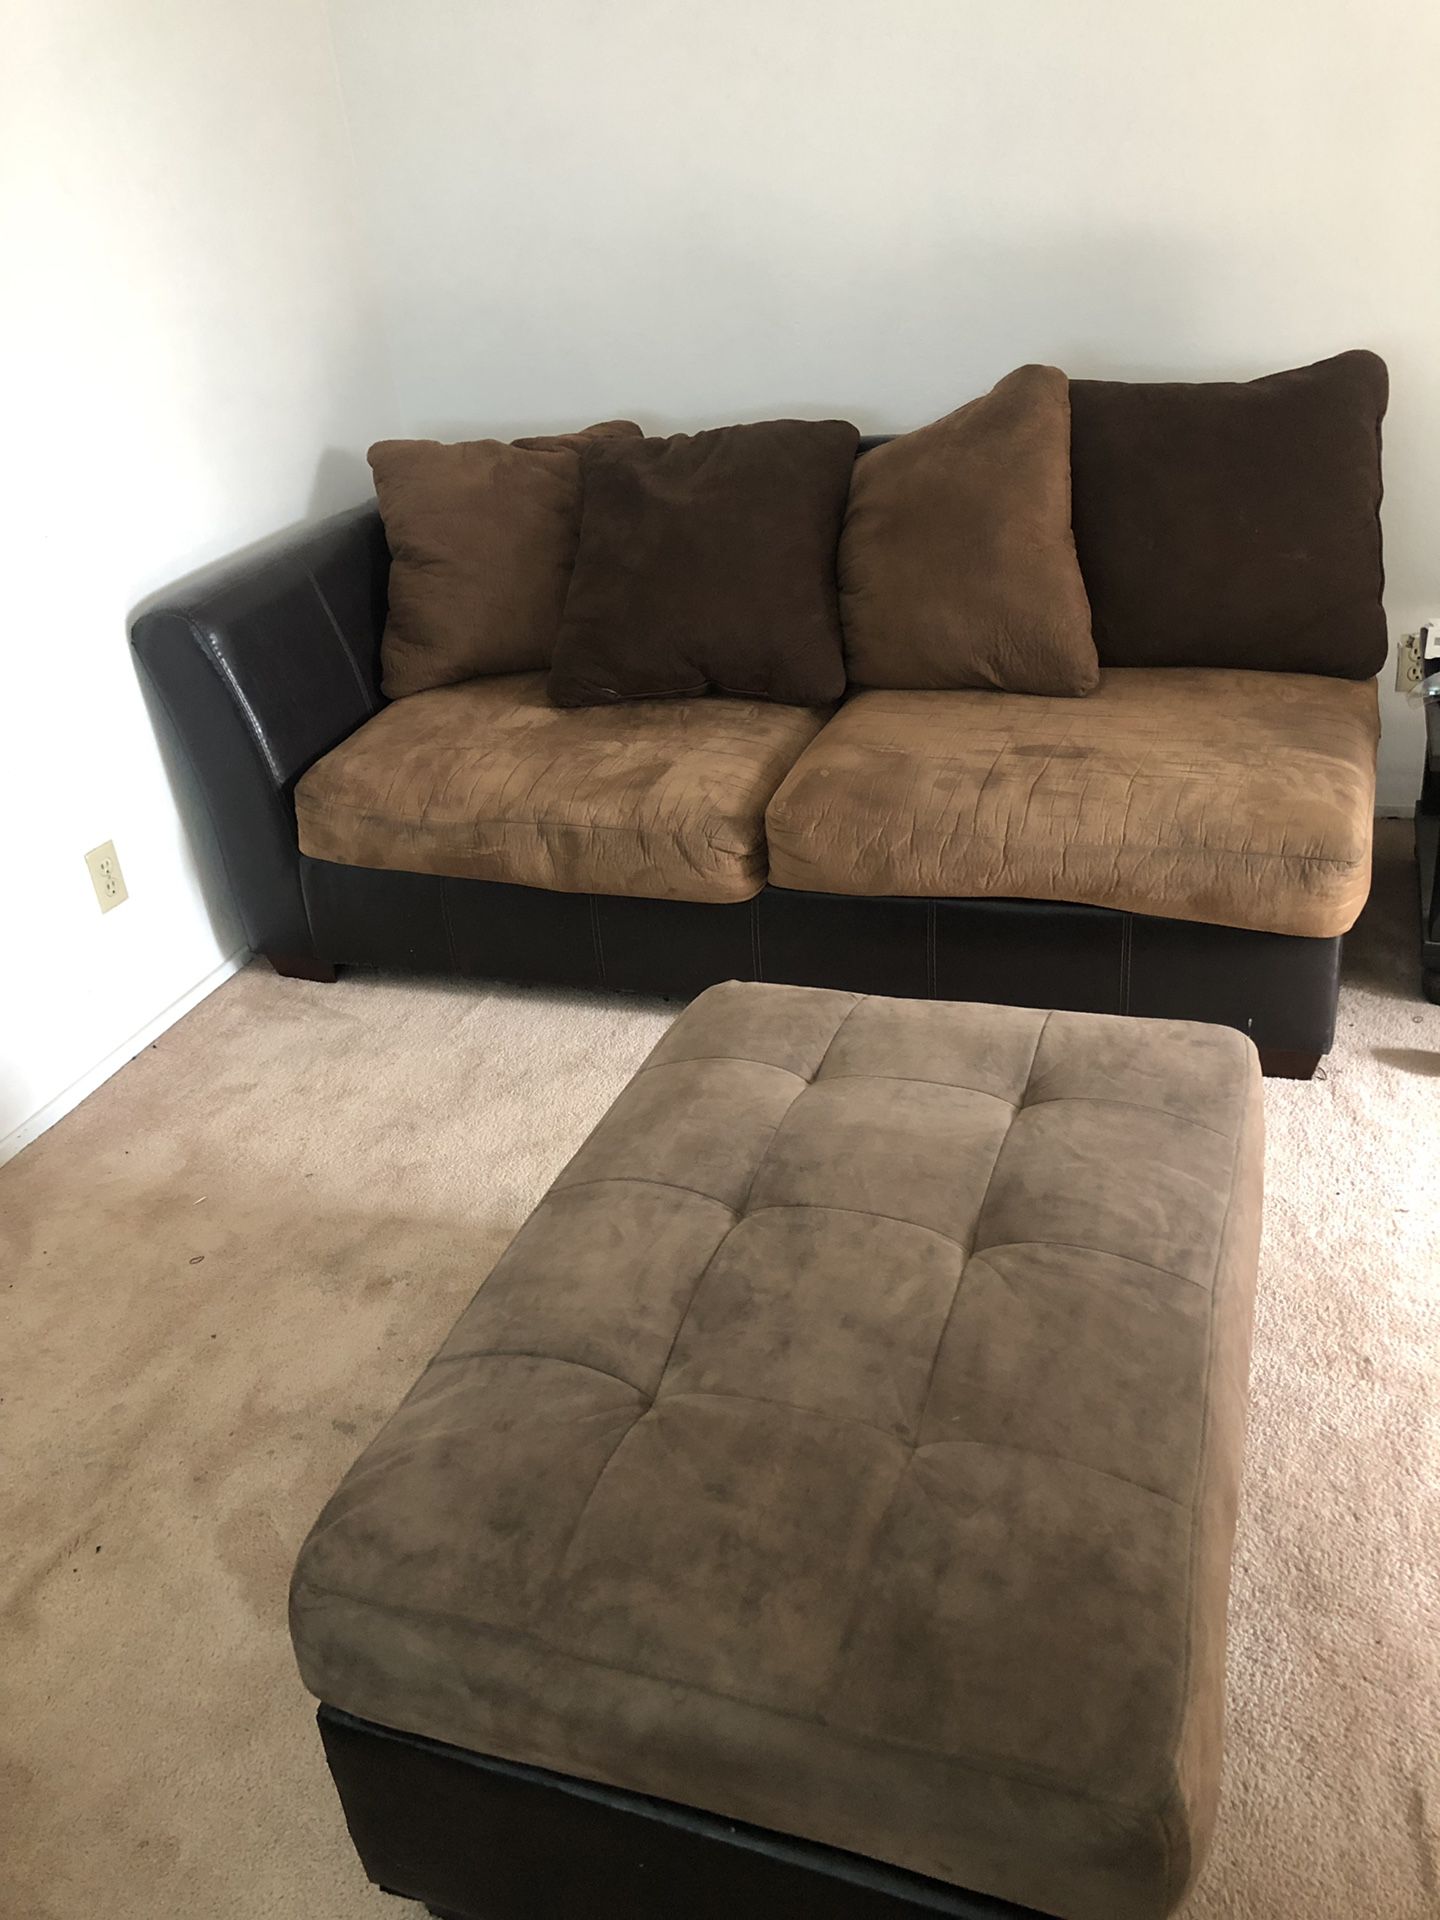 Used mocha and coffee sectional couch